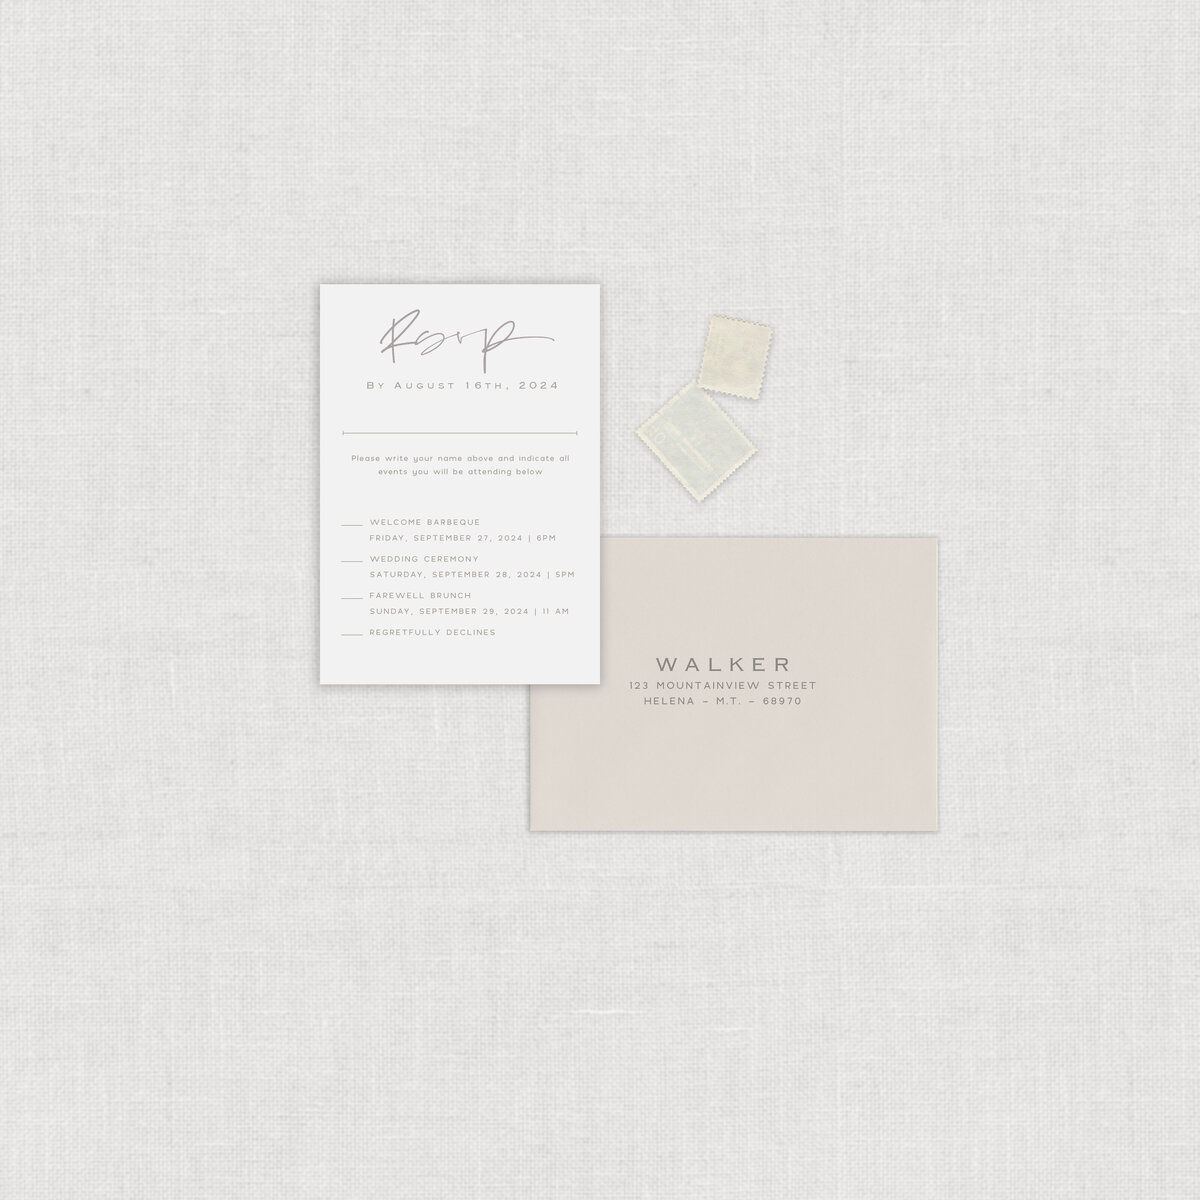 Weekend Wedding Getaway wedding calligraphy invitation with RSVP detail card with wedding calligraphy and rsvp envelope.